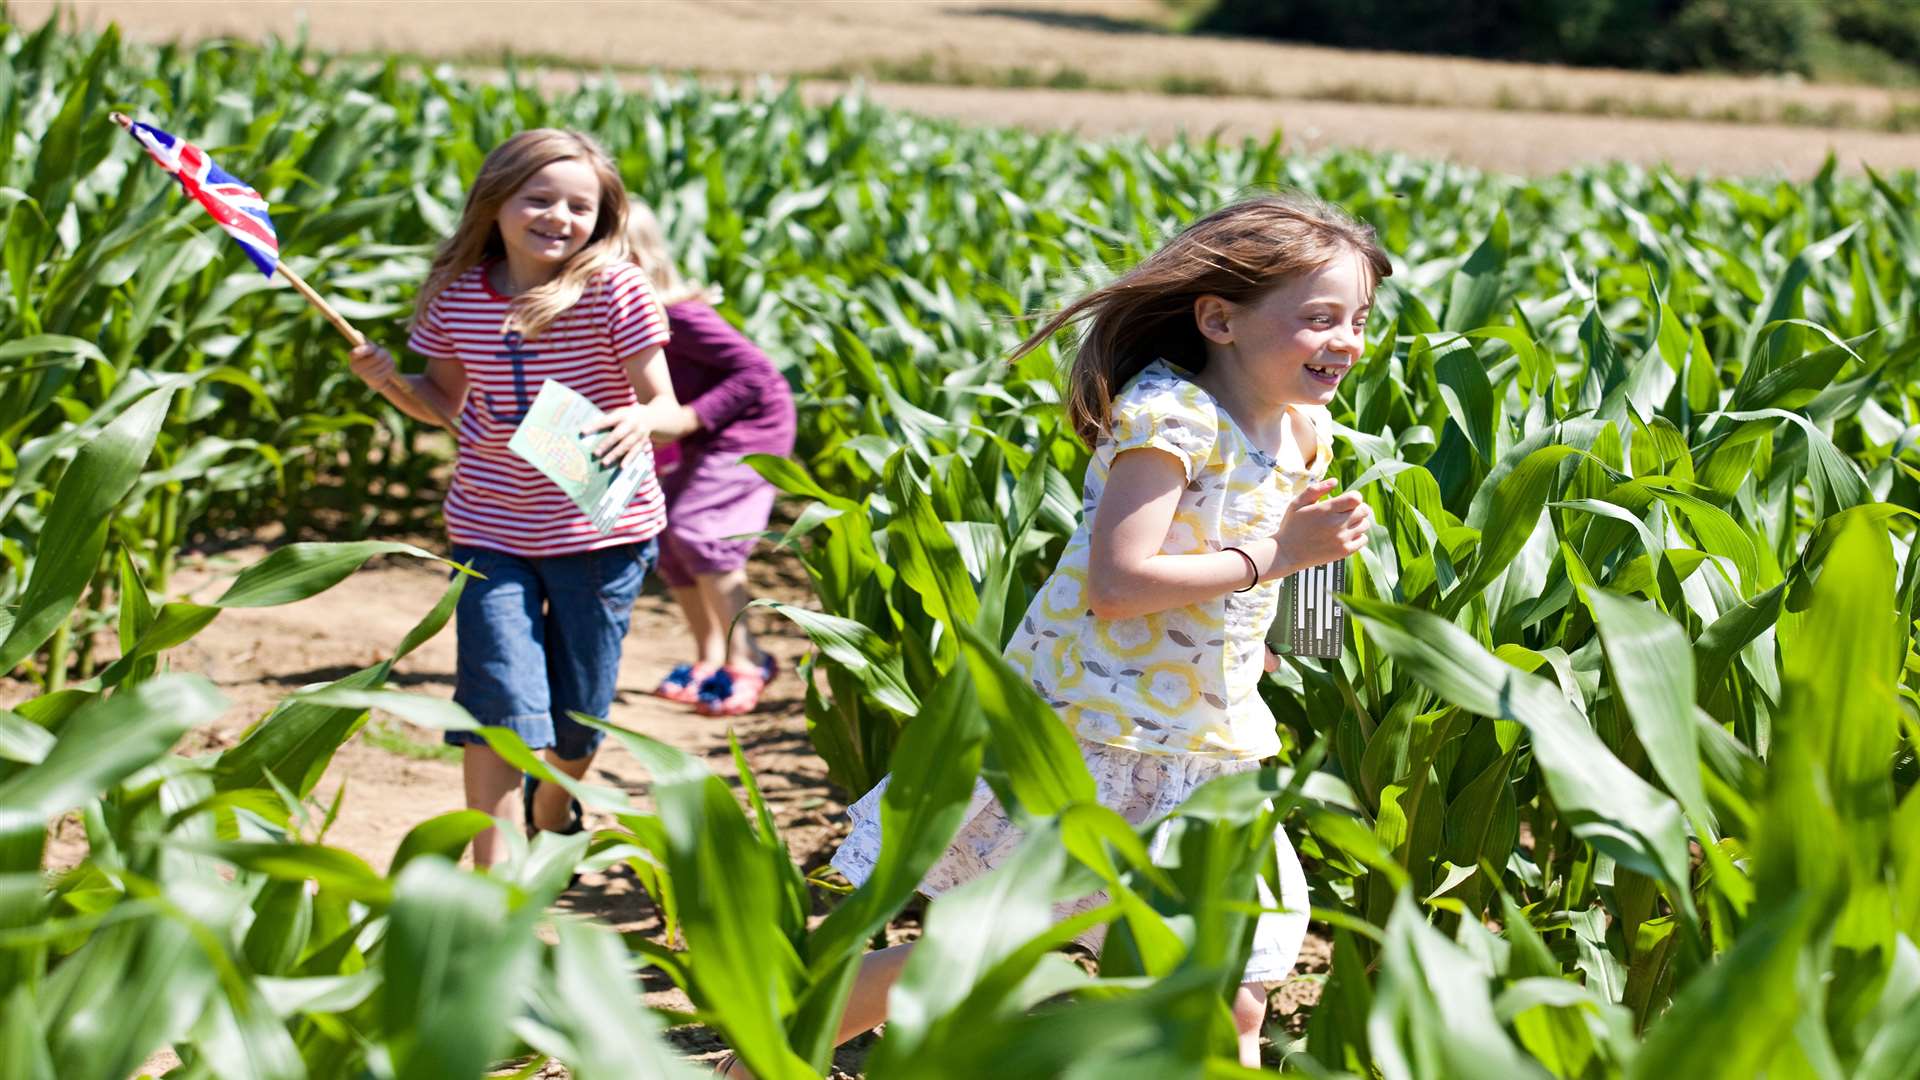 Try the Maize Maze at Penshurst Place